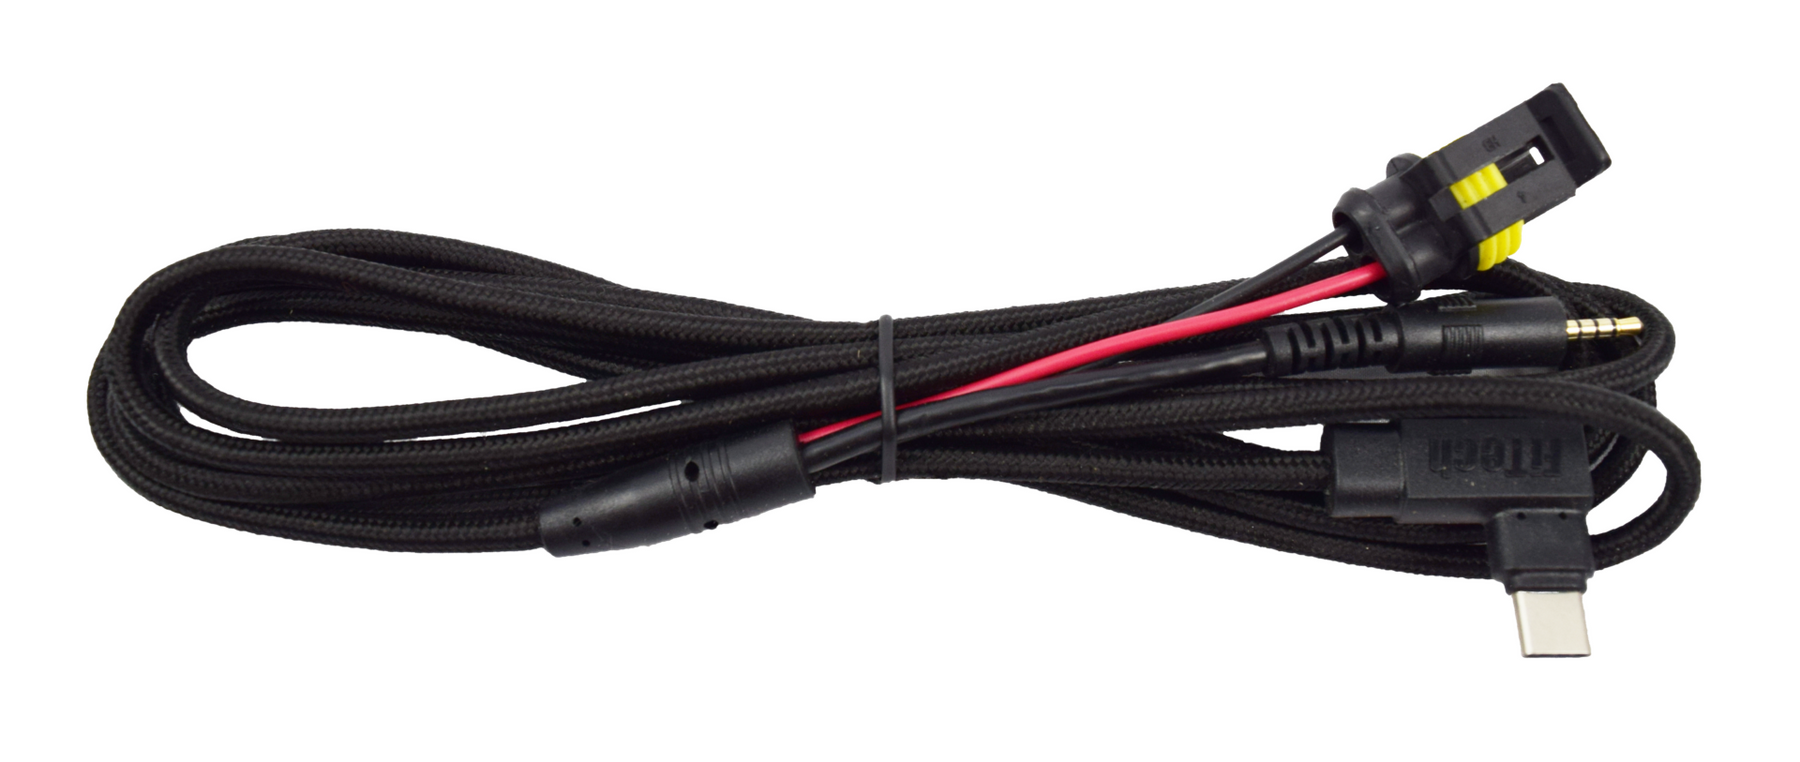 62014 - New Handheld Cable - FiTech